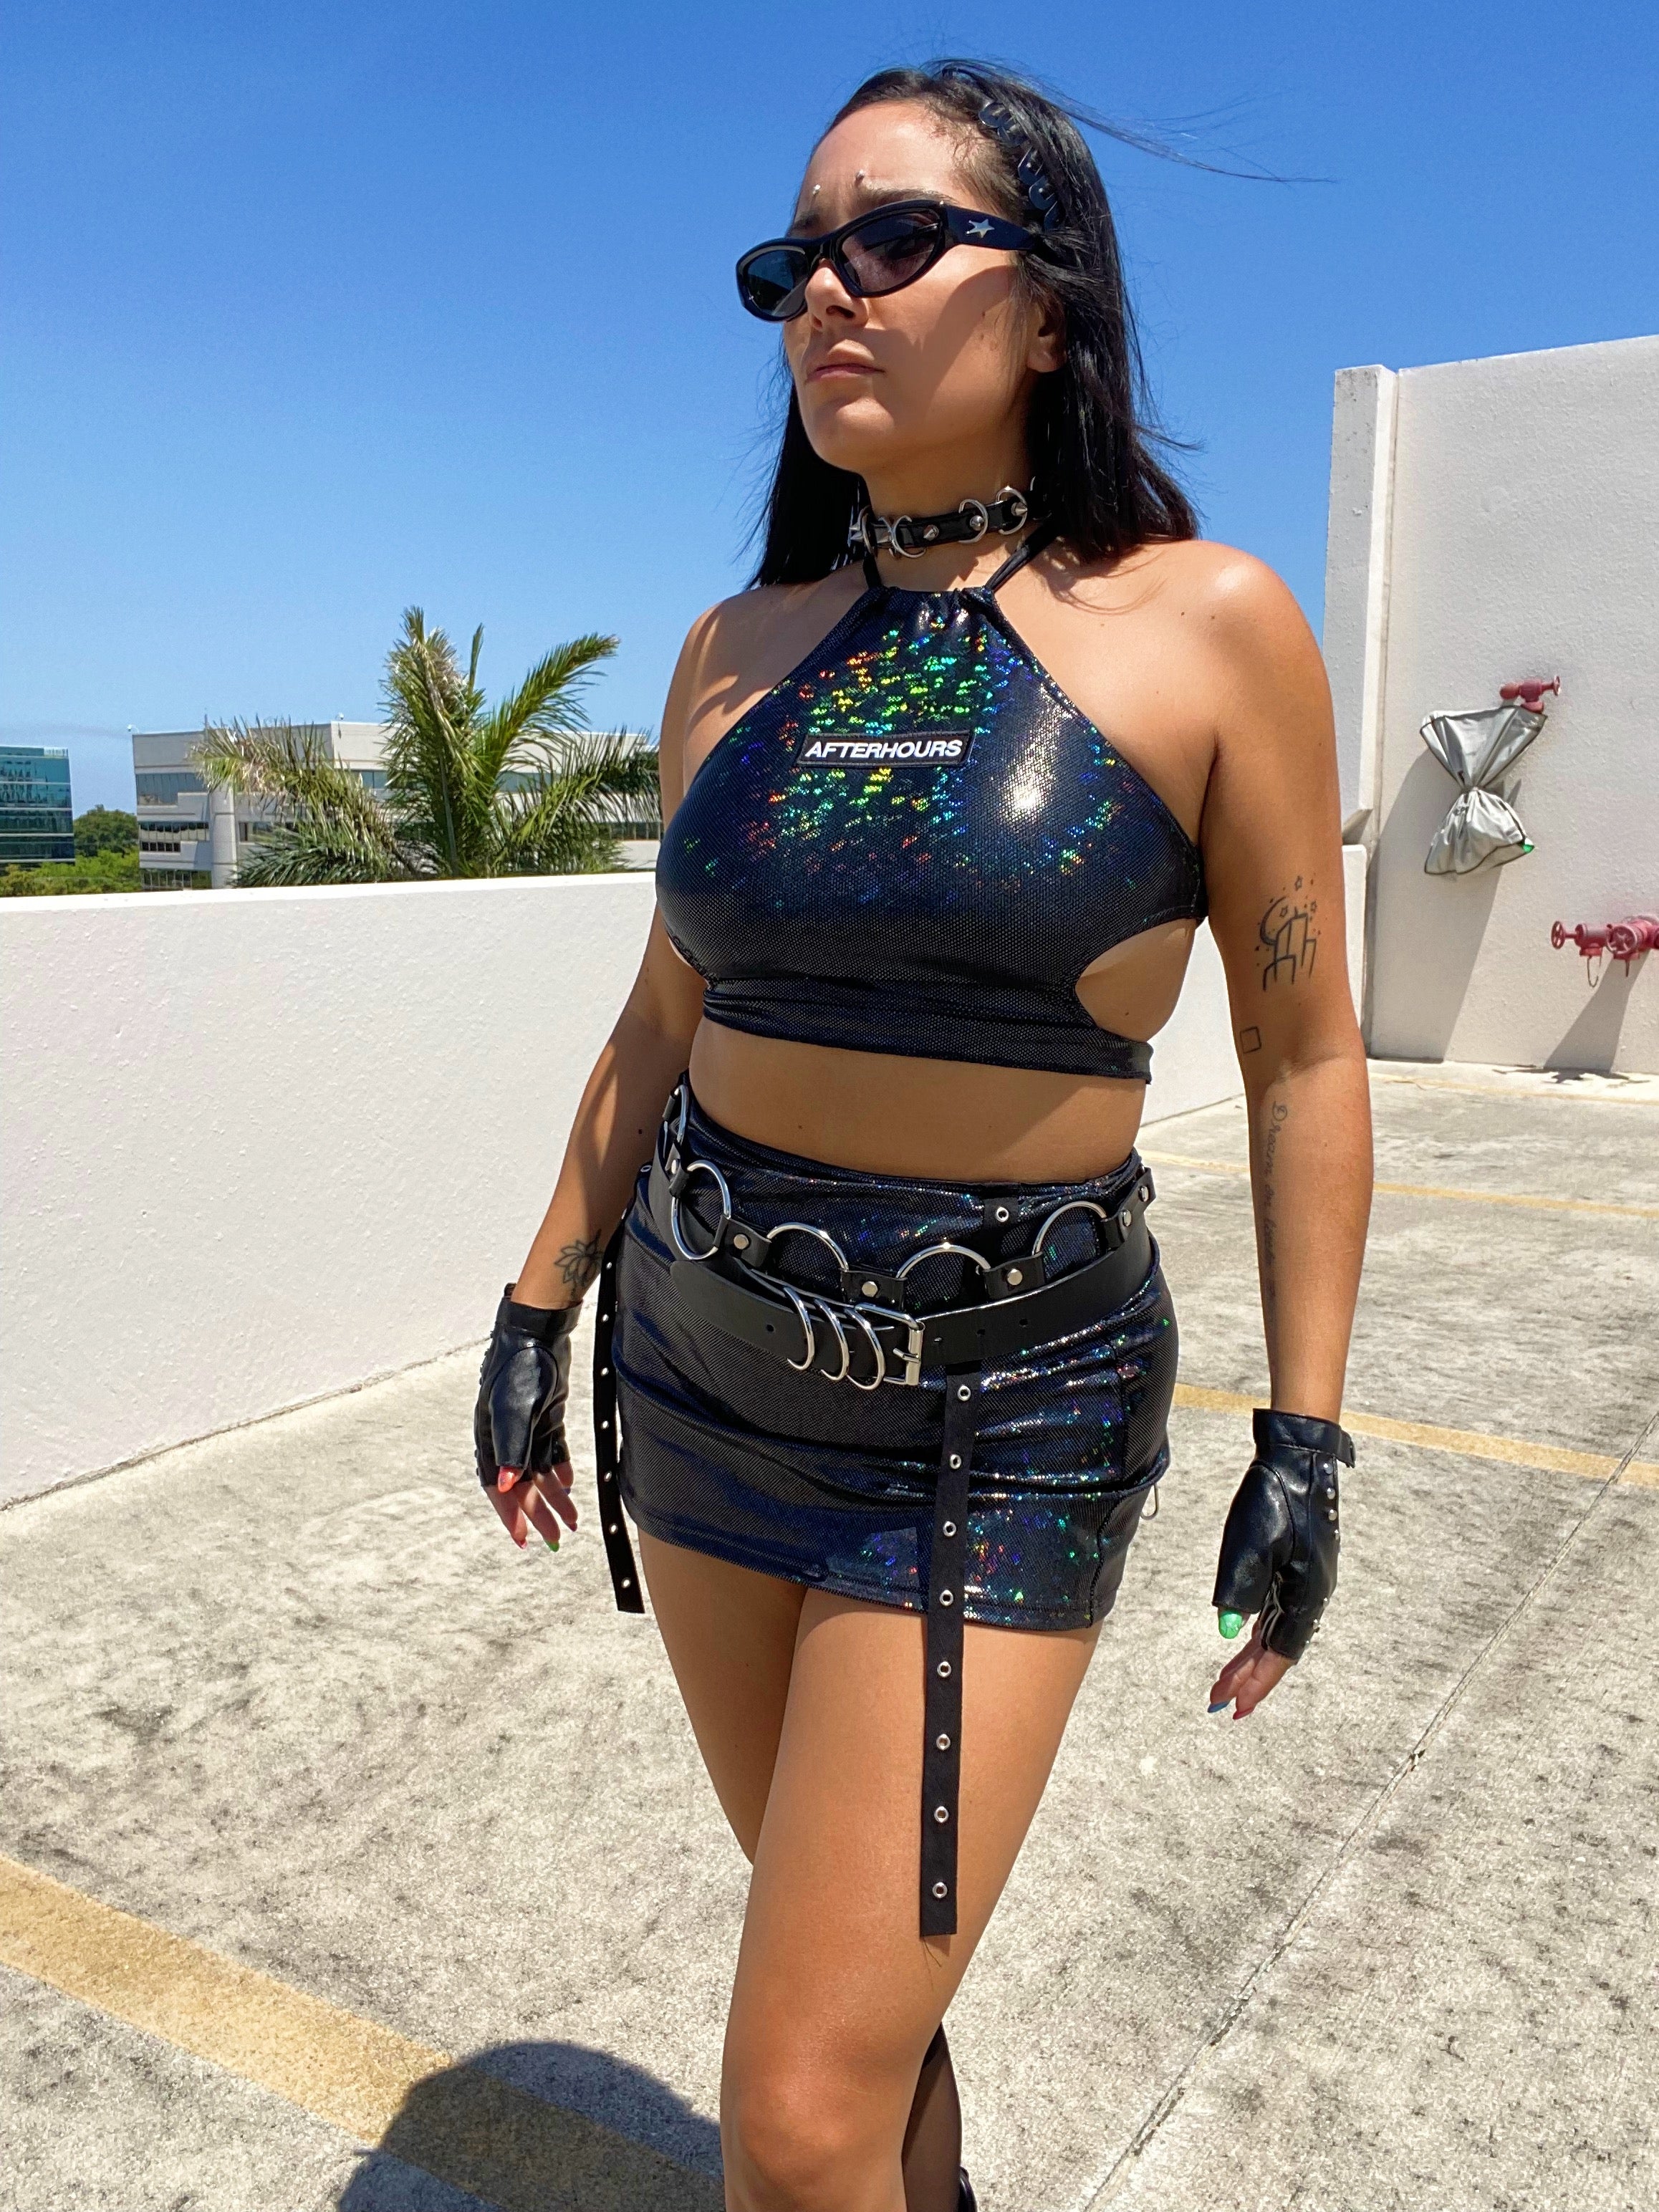 SHOP FESTIVAL OUTFITS & RAVE CLOTHING – Mi Gente Clothing